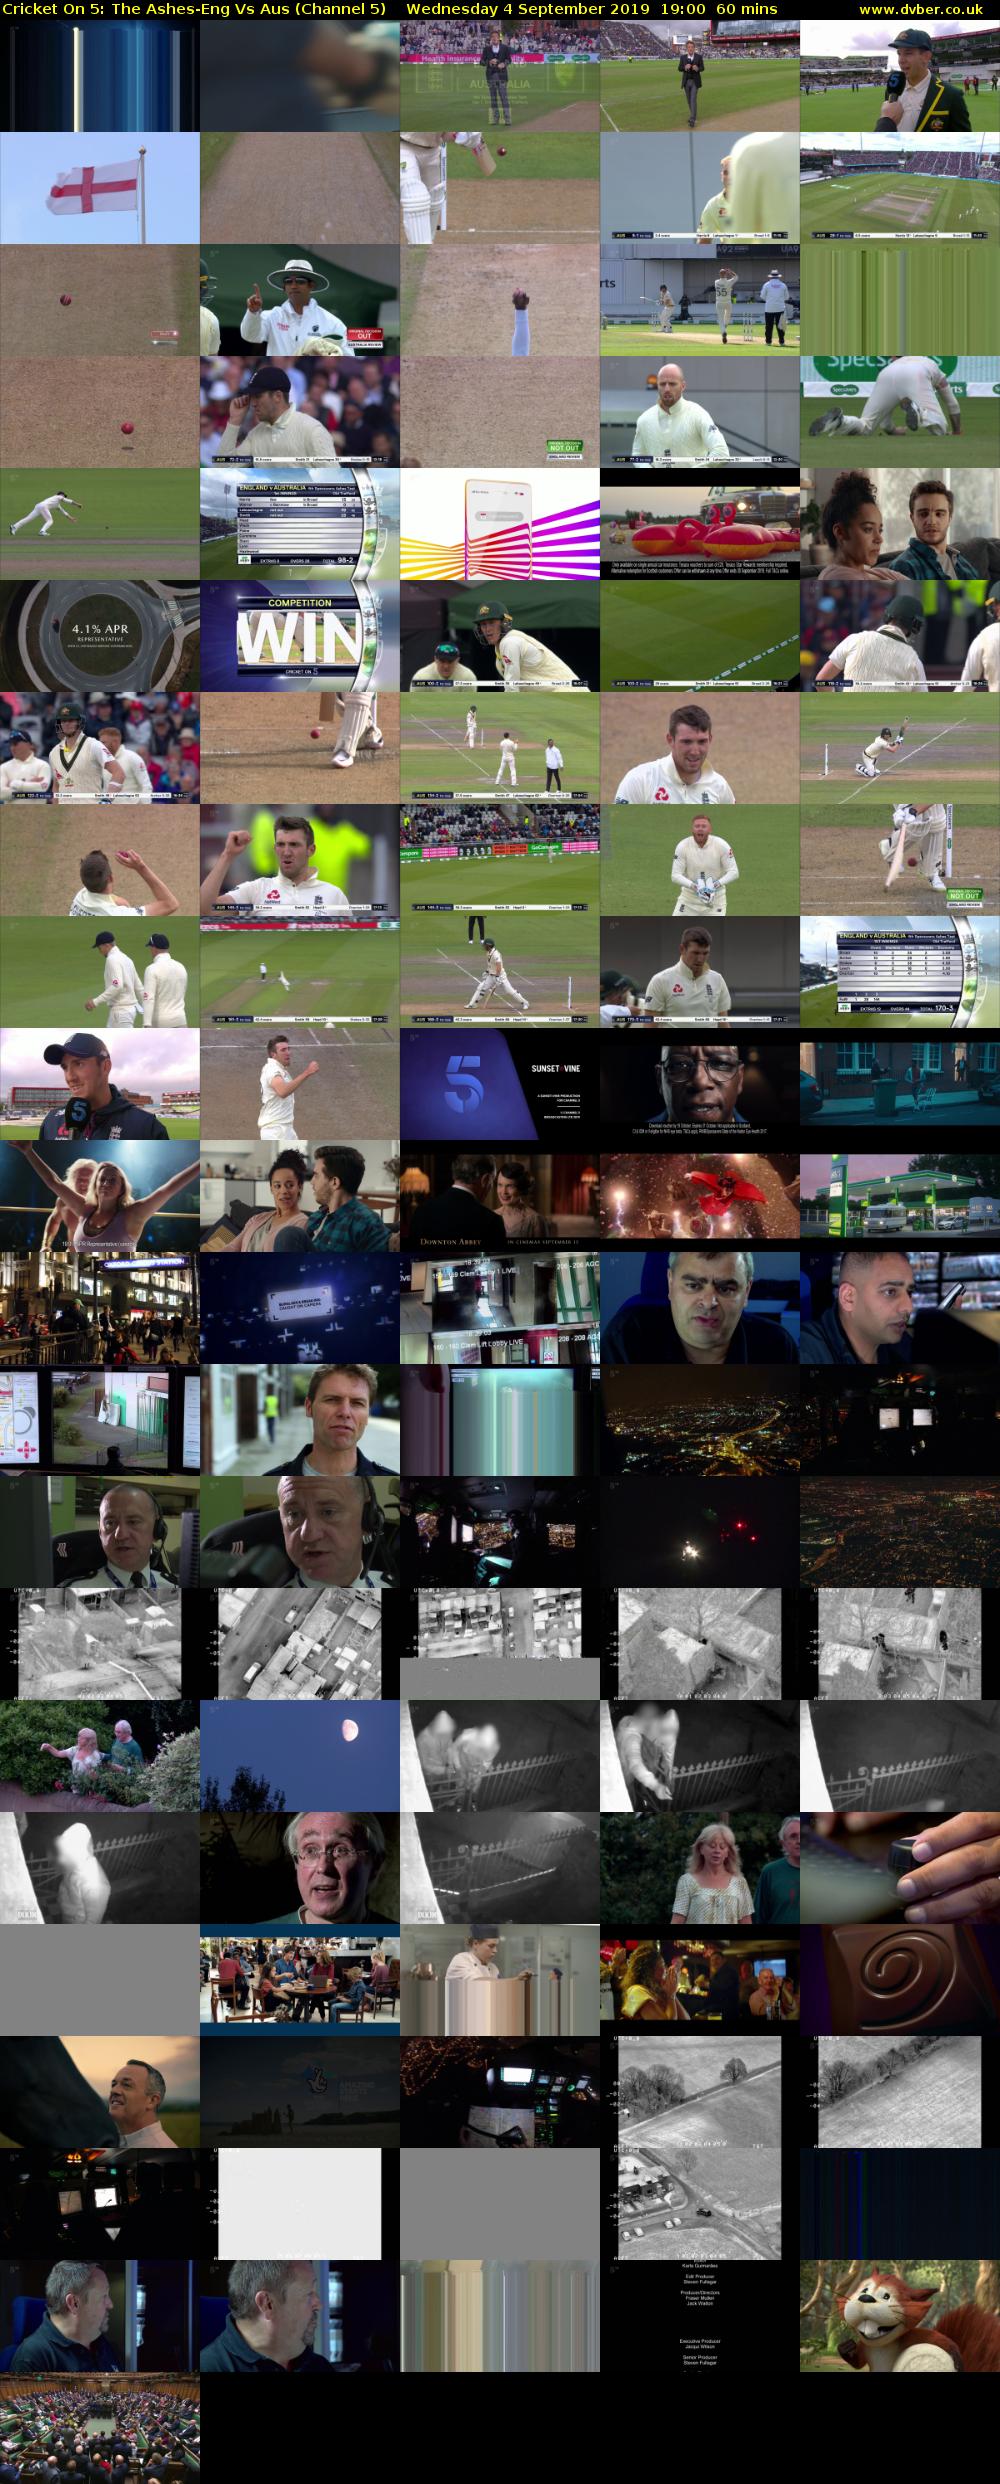 Cricket On 5: The Ashes-Eng Vs Aus (Channel 5) Wednesday 4 September 2019 19:00 - 20:00